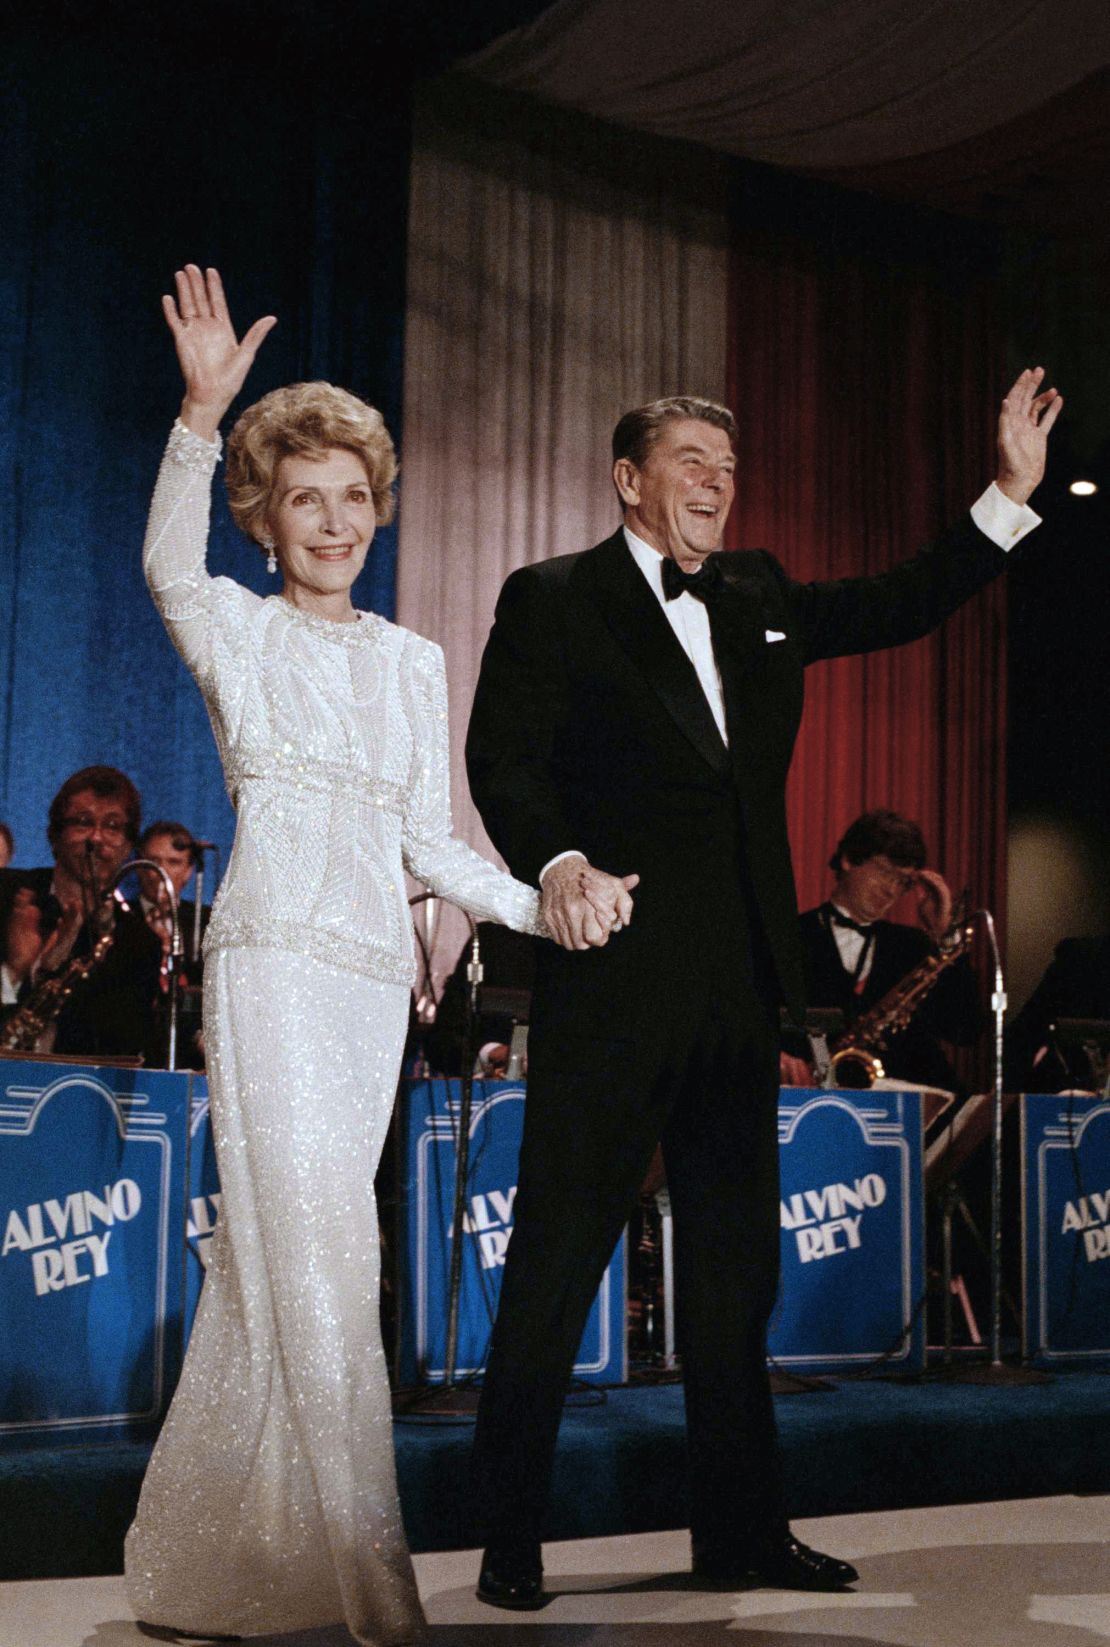 Nancy and Ronald Reagan arrive at the inaugural ball in the Washington Hilton on January 21, 1985.